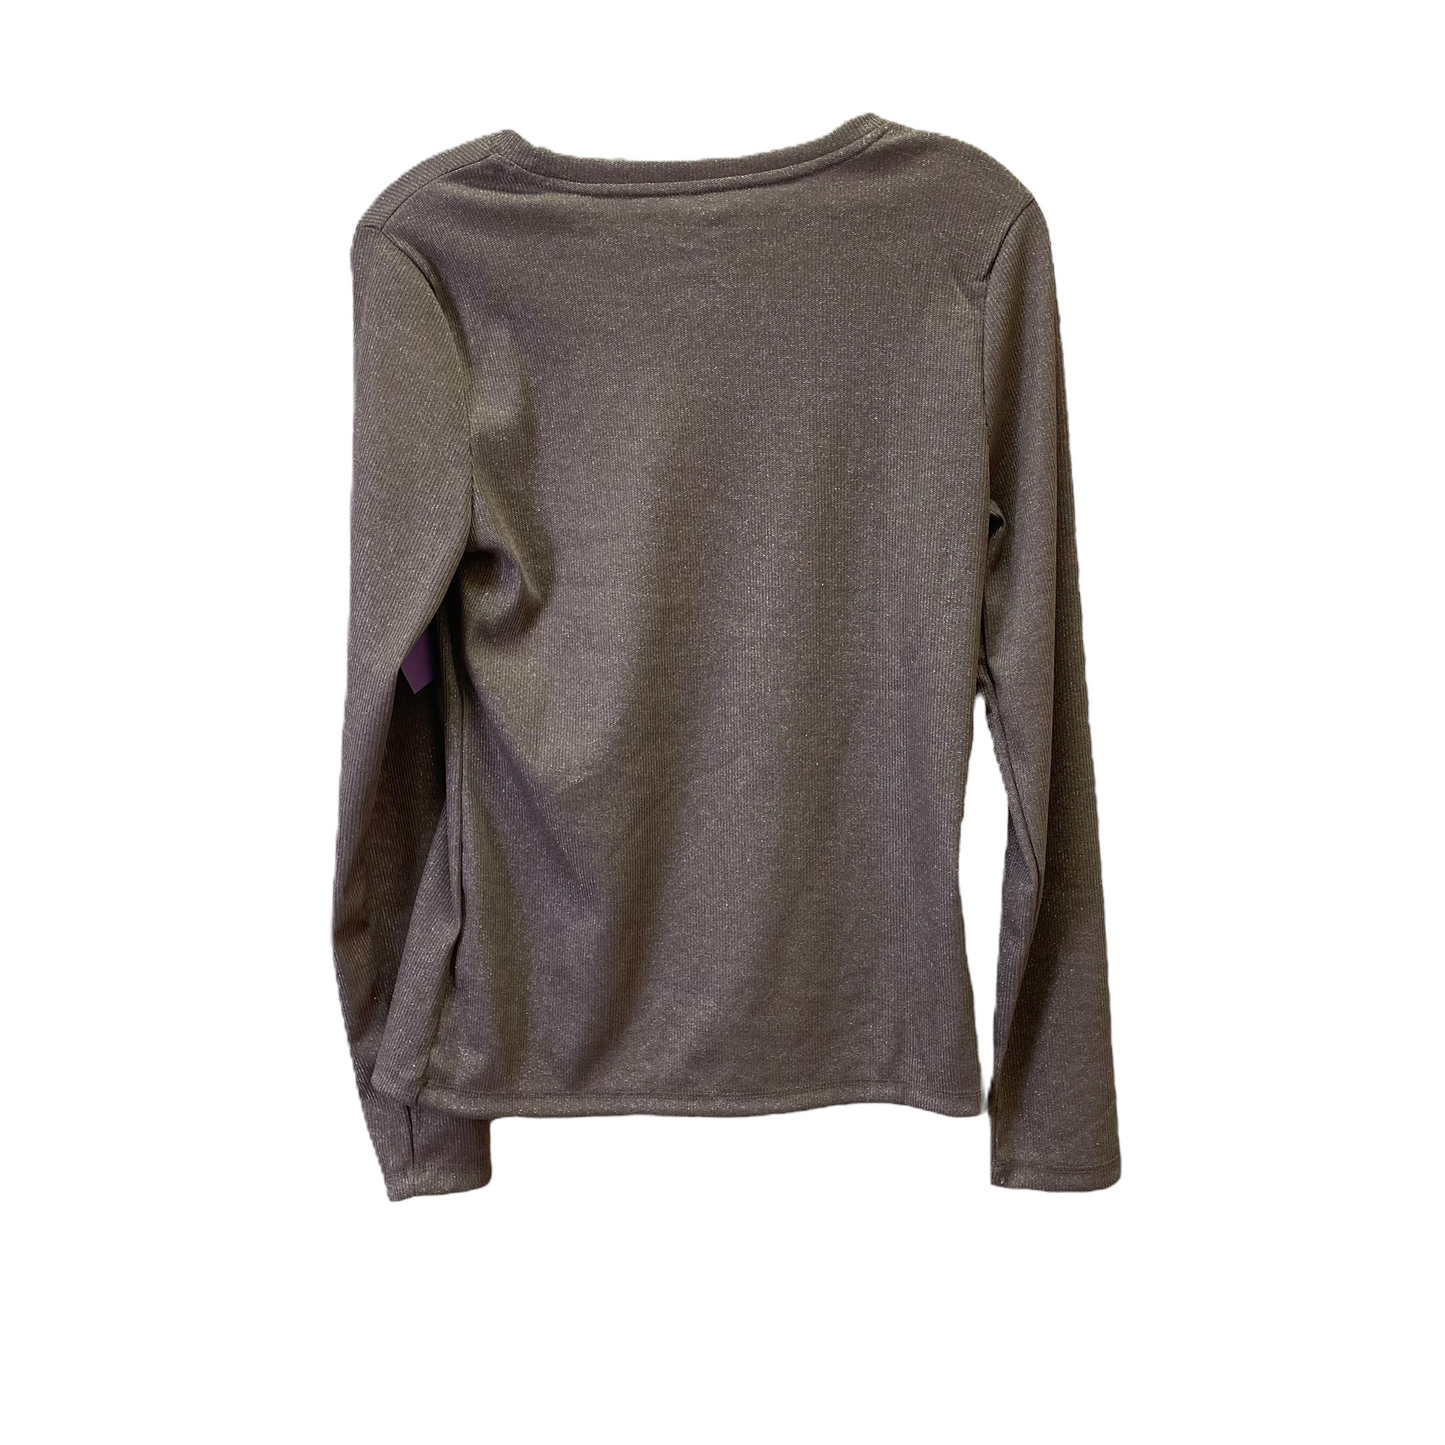 Taupe Top Long Sleeve Basic By A New Day, Size: M